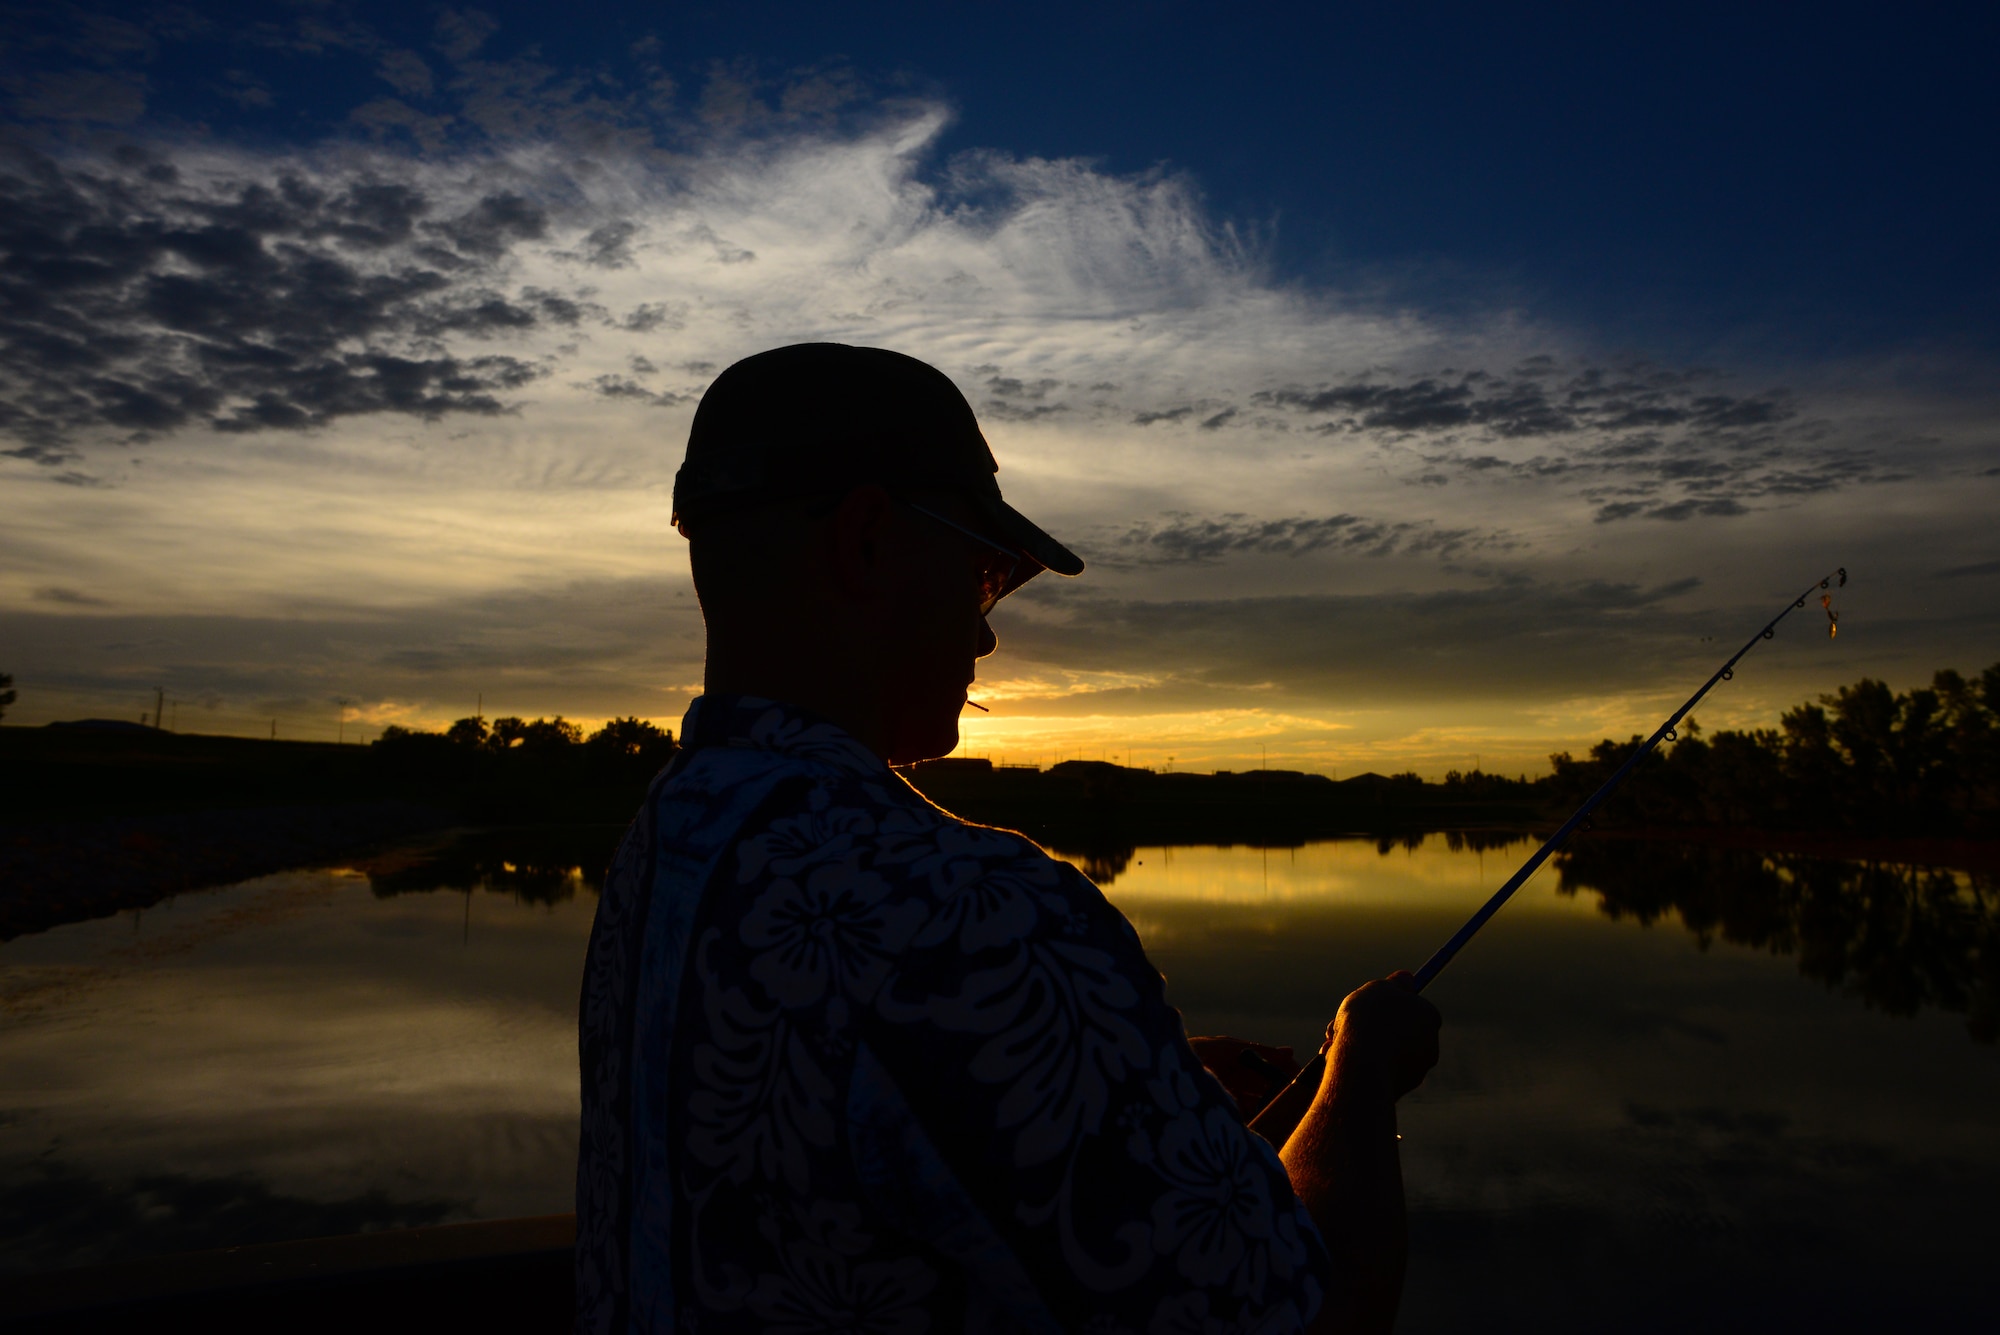 Airman John Ennis, a 28th Bomb Wing Public Affairs broadcast journalist, prepares to cast his fishing rod at Gateway Lake on Ellsworth Air Force Base, S.D., July 12, 2018. Caution is advised as snapping turtles have been seen in lakes located across the base. (U.S. Air Force photo by Airman 1st Class Nicolas Z. Erwin)